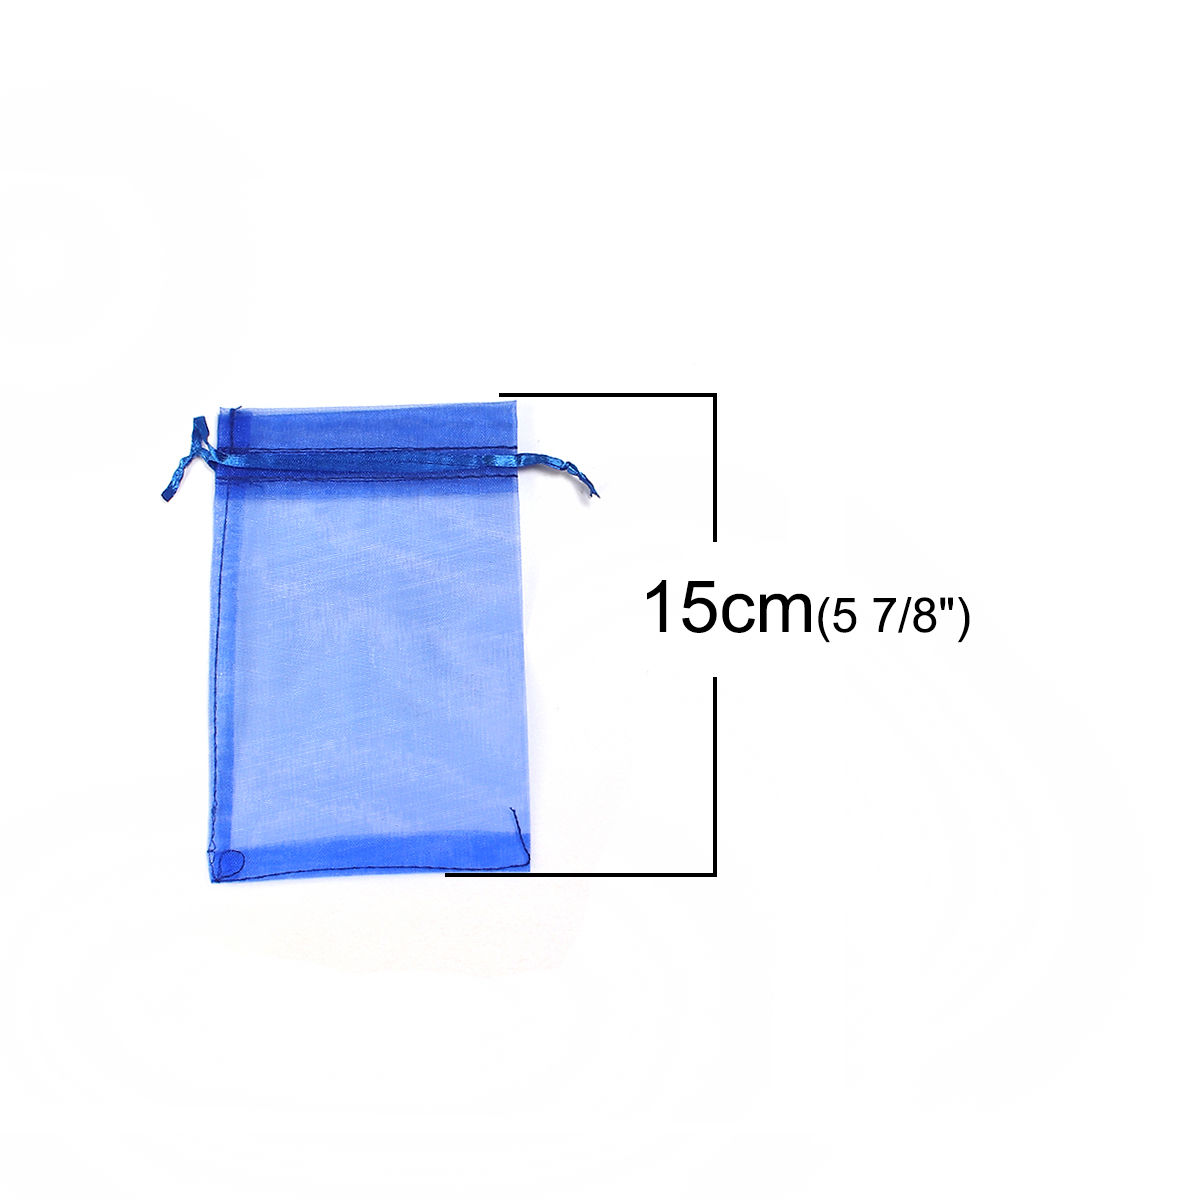 Picture of Wedding Gift Organza Jewelry Bags Drawstring Rectangle Royal Blue (Usable Space: 13x10cm) 15cm(5 7/8") x 10cm(3 7/8"), 20 PCs